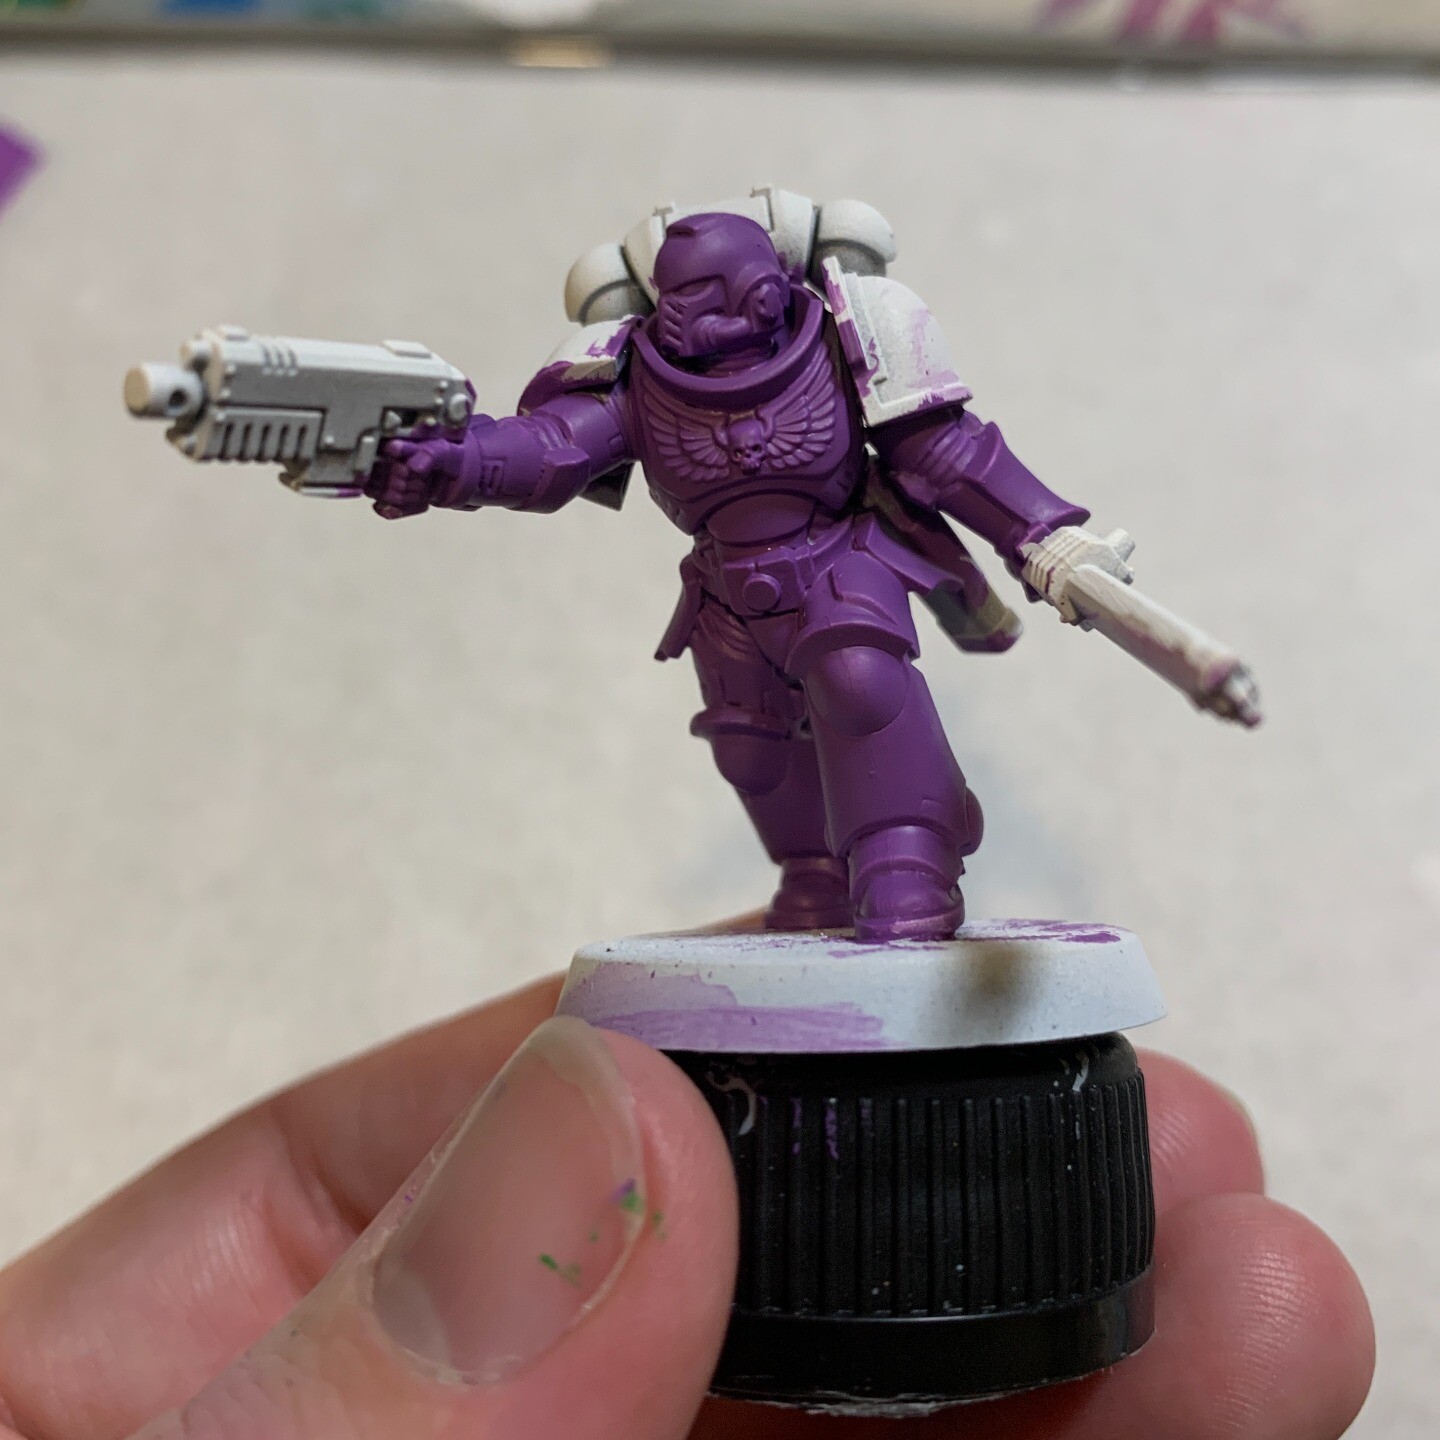 I'm holding a half-painted Warhammer 40k Assult Intercessor Space Marine. The main armour has been painted in a pink-purple colour. The backpack, shoulder pads and weapons are unpainted and white. The base is unpainted and is on a black bottle cap.  My hand is in the bottom of the frame with some purple and green paint on the nail. The background is white parchment.